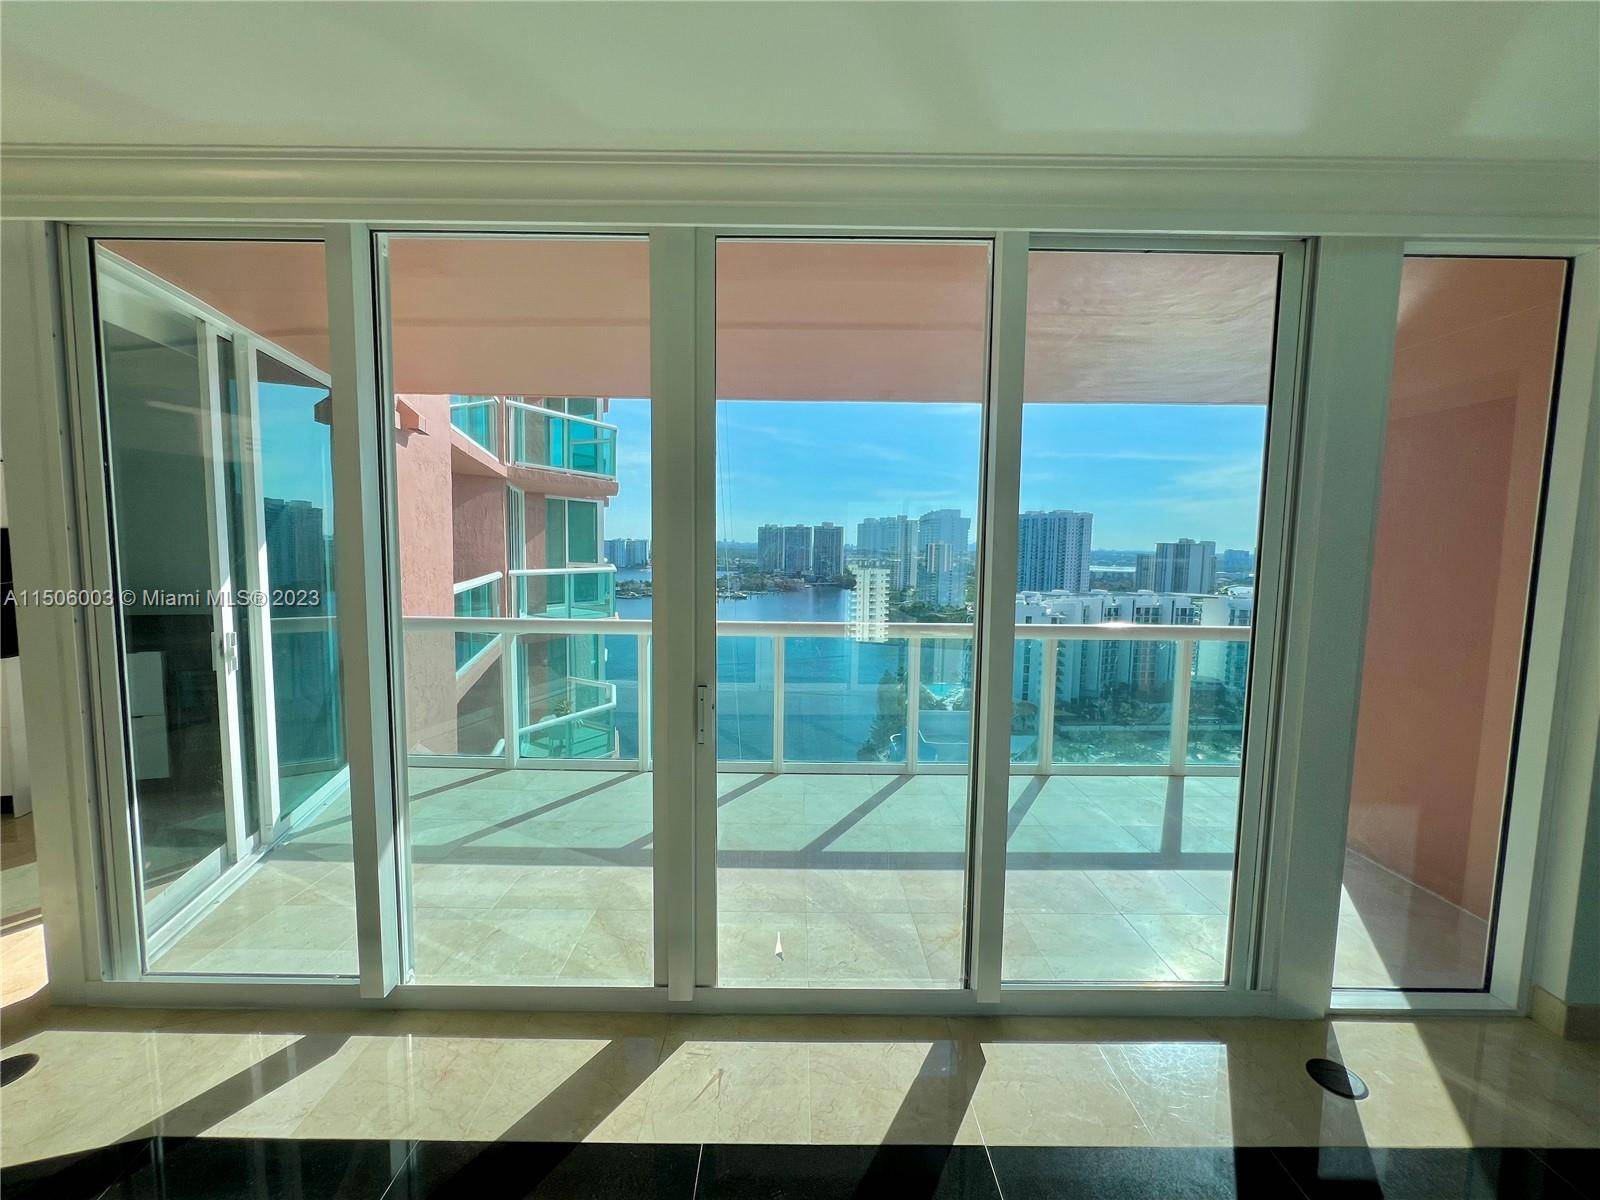 Brand new remodeled unit in a high floor in Hidden Bay Aventura, beautiful marble floors, new European kitchen, with all new appliances, drop ceilings throughout the unit with a new ...